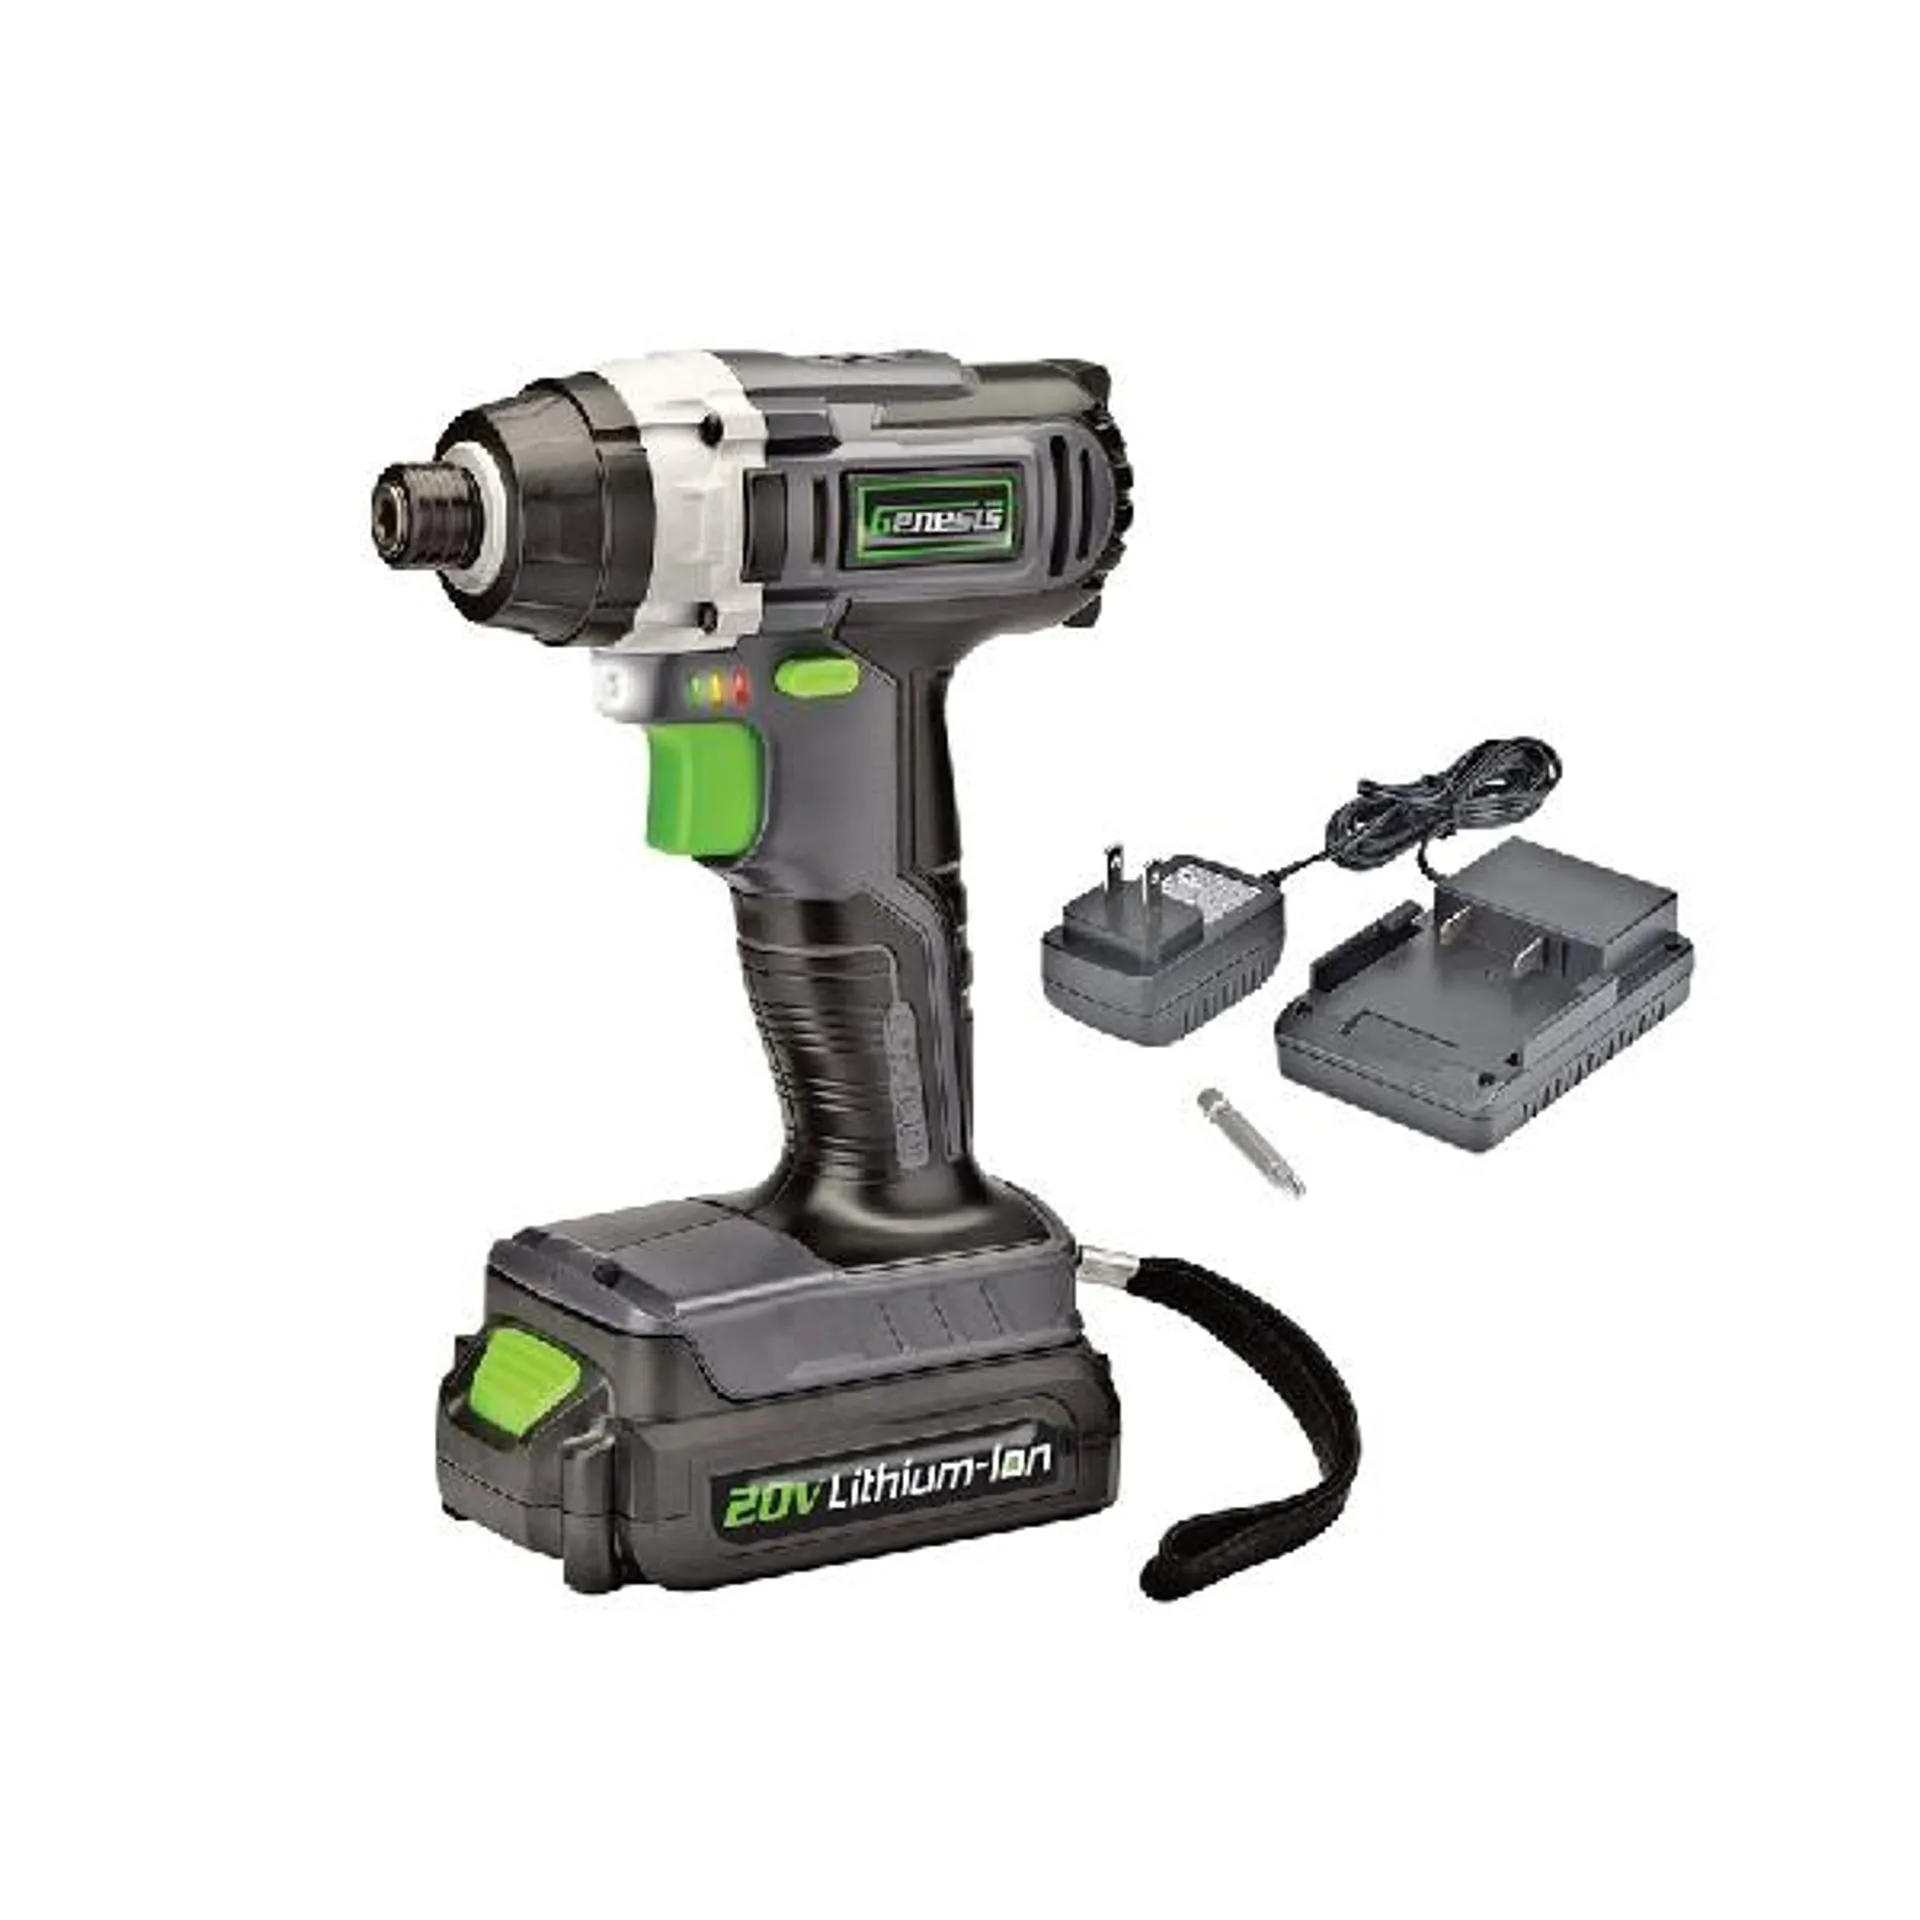 GLID20A Impact Driver, Battery Included, 20 V, 1.5 Ah, 1/4 in Drive, Hex Drive, 0 to 3800 ipm